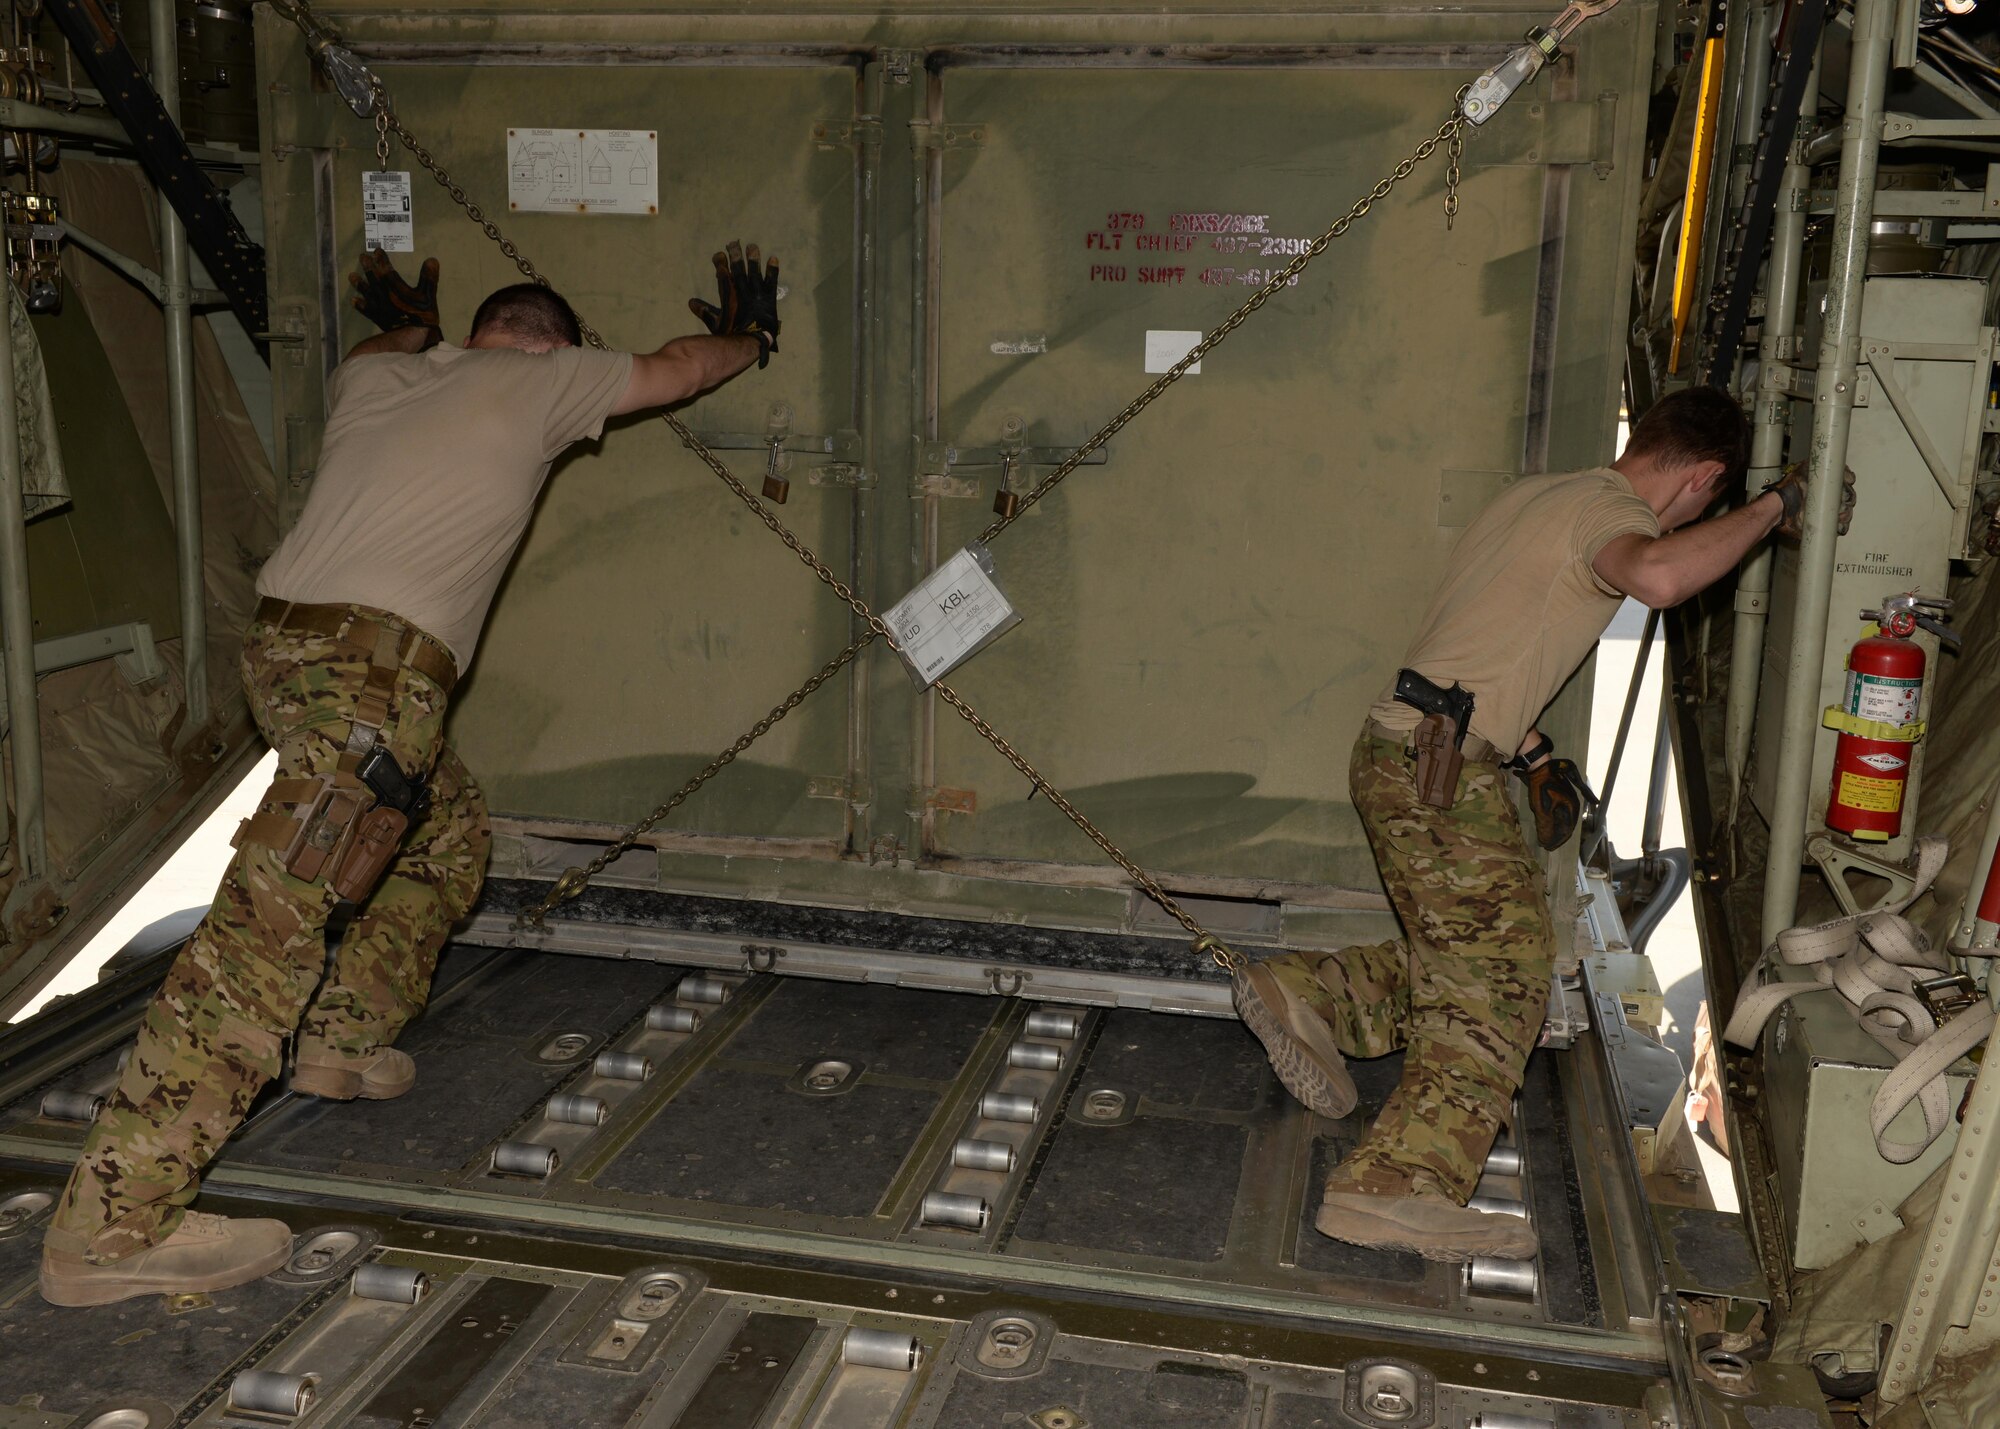 C-130J Super Hercules loadmasters push heavy cargo out of an aircraft Aug. 28, 2015, at Mazar-e-Sharif, Afghanistan. The loadmasters are deployed from Little Rock Air Force Base, Arkansas, and are responsible for delivering mission essential cargo and passenger to various forward operating bases within the area of responsibility. (U.S. Air Force photo by Senior Airman Cierra Presentado/Released)